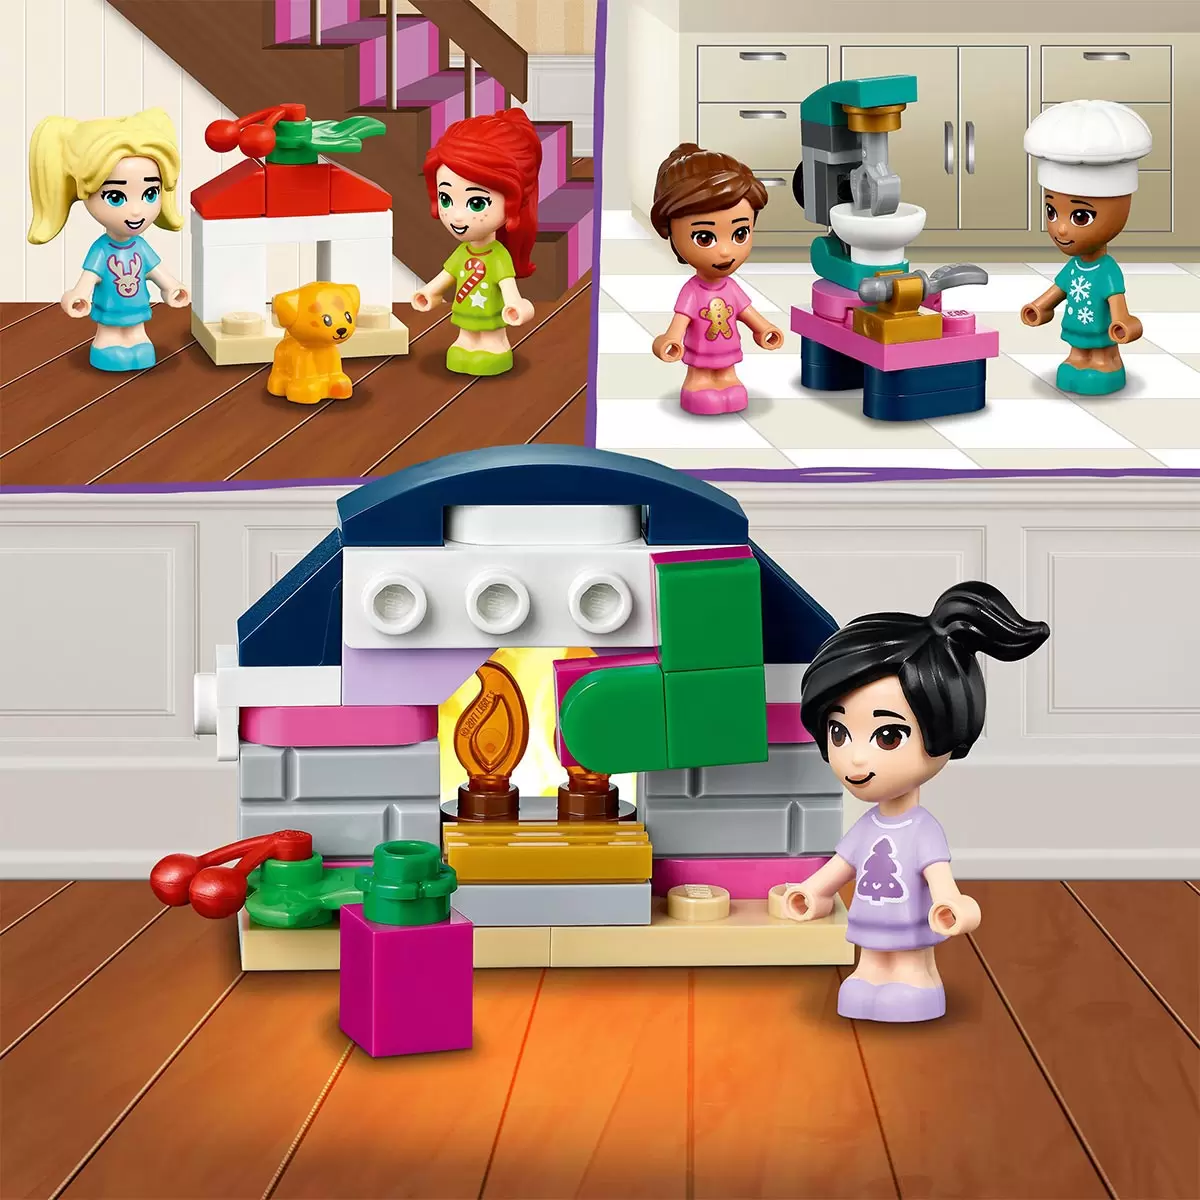 Buy LEGO Friends Advent Calendar Features2 Image at Costco.co.uk